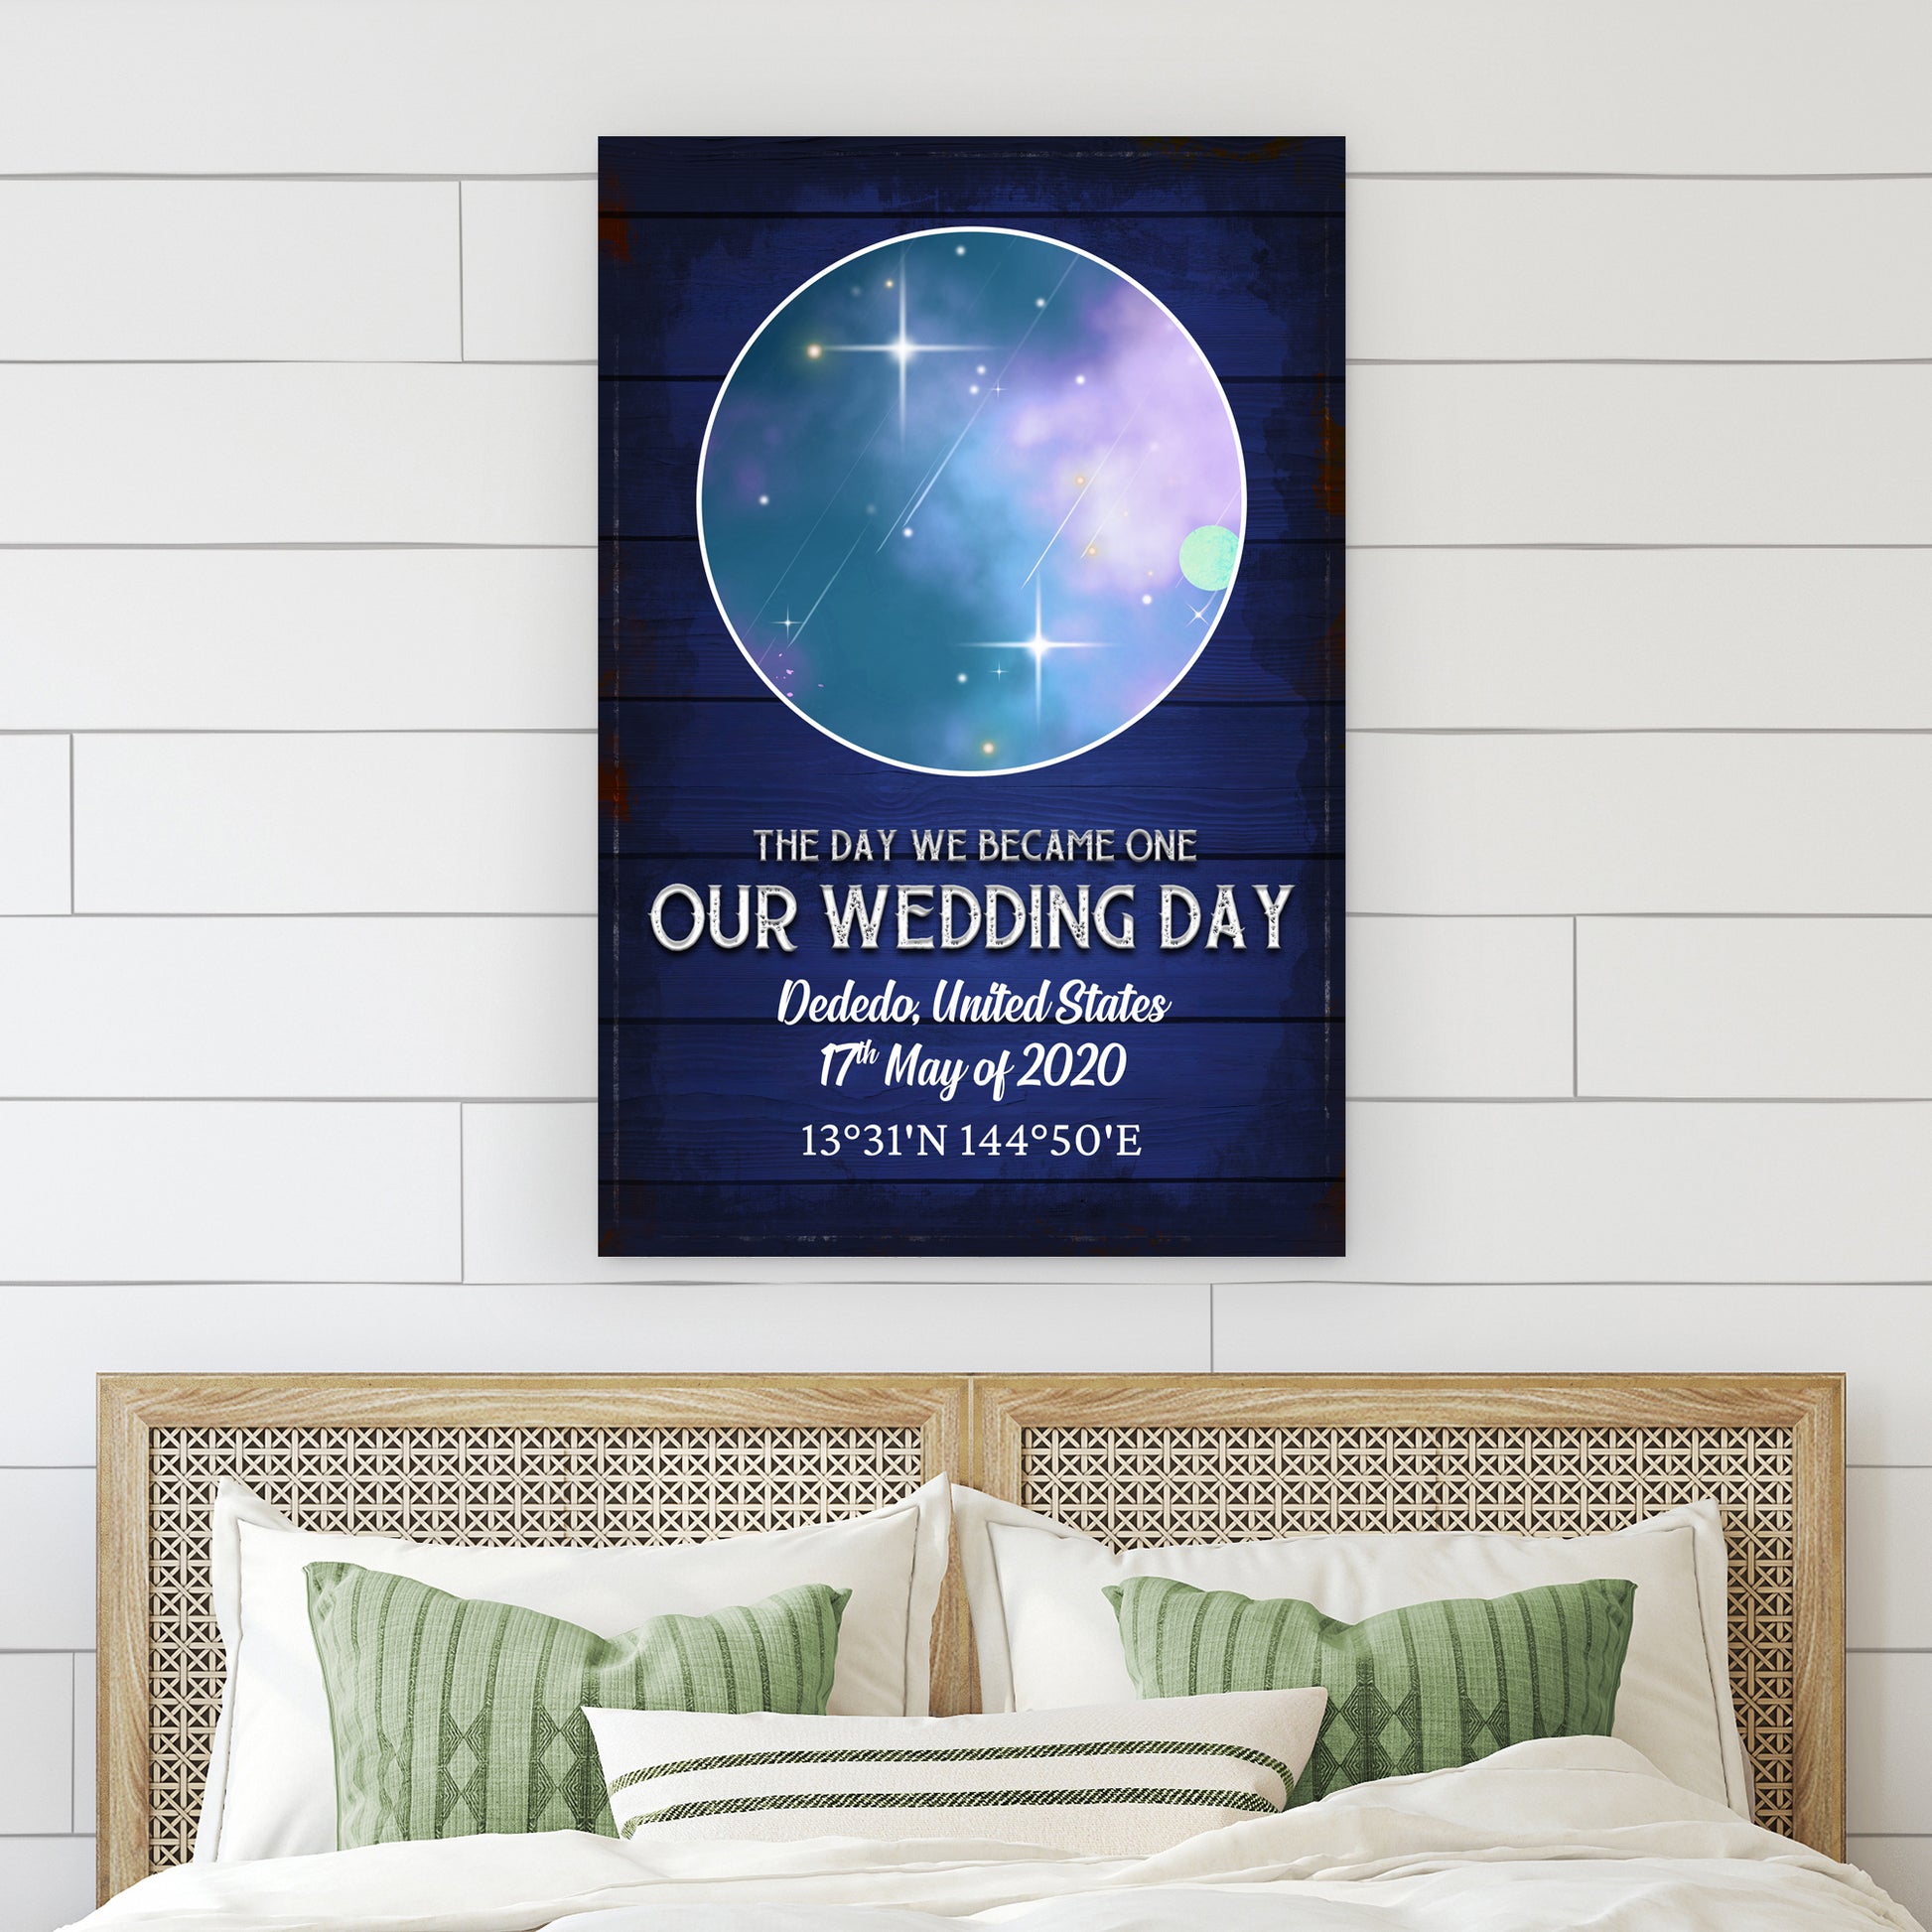 The Day We Became One. Our Wedding Day Sign  - Image by Tailored Canvases